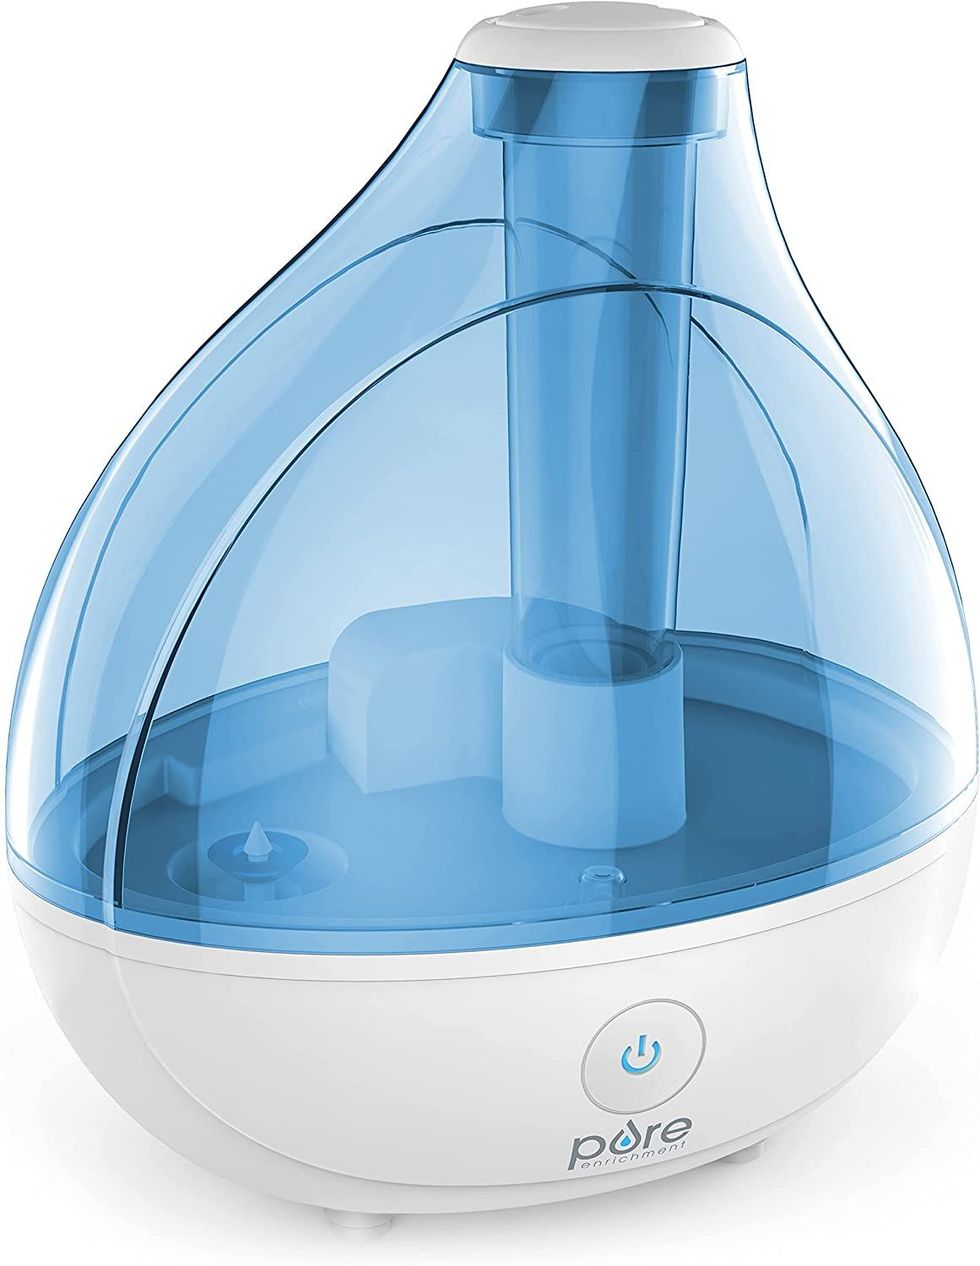 14 Best Bedroom Humidifiers 2022 — Top Rated Humidifiers